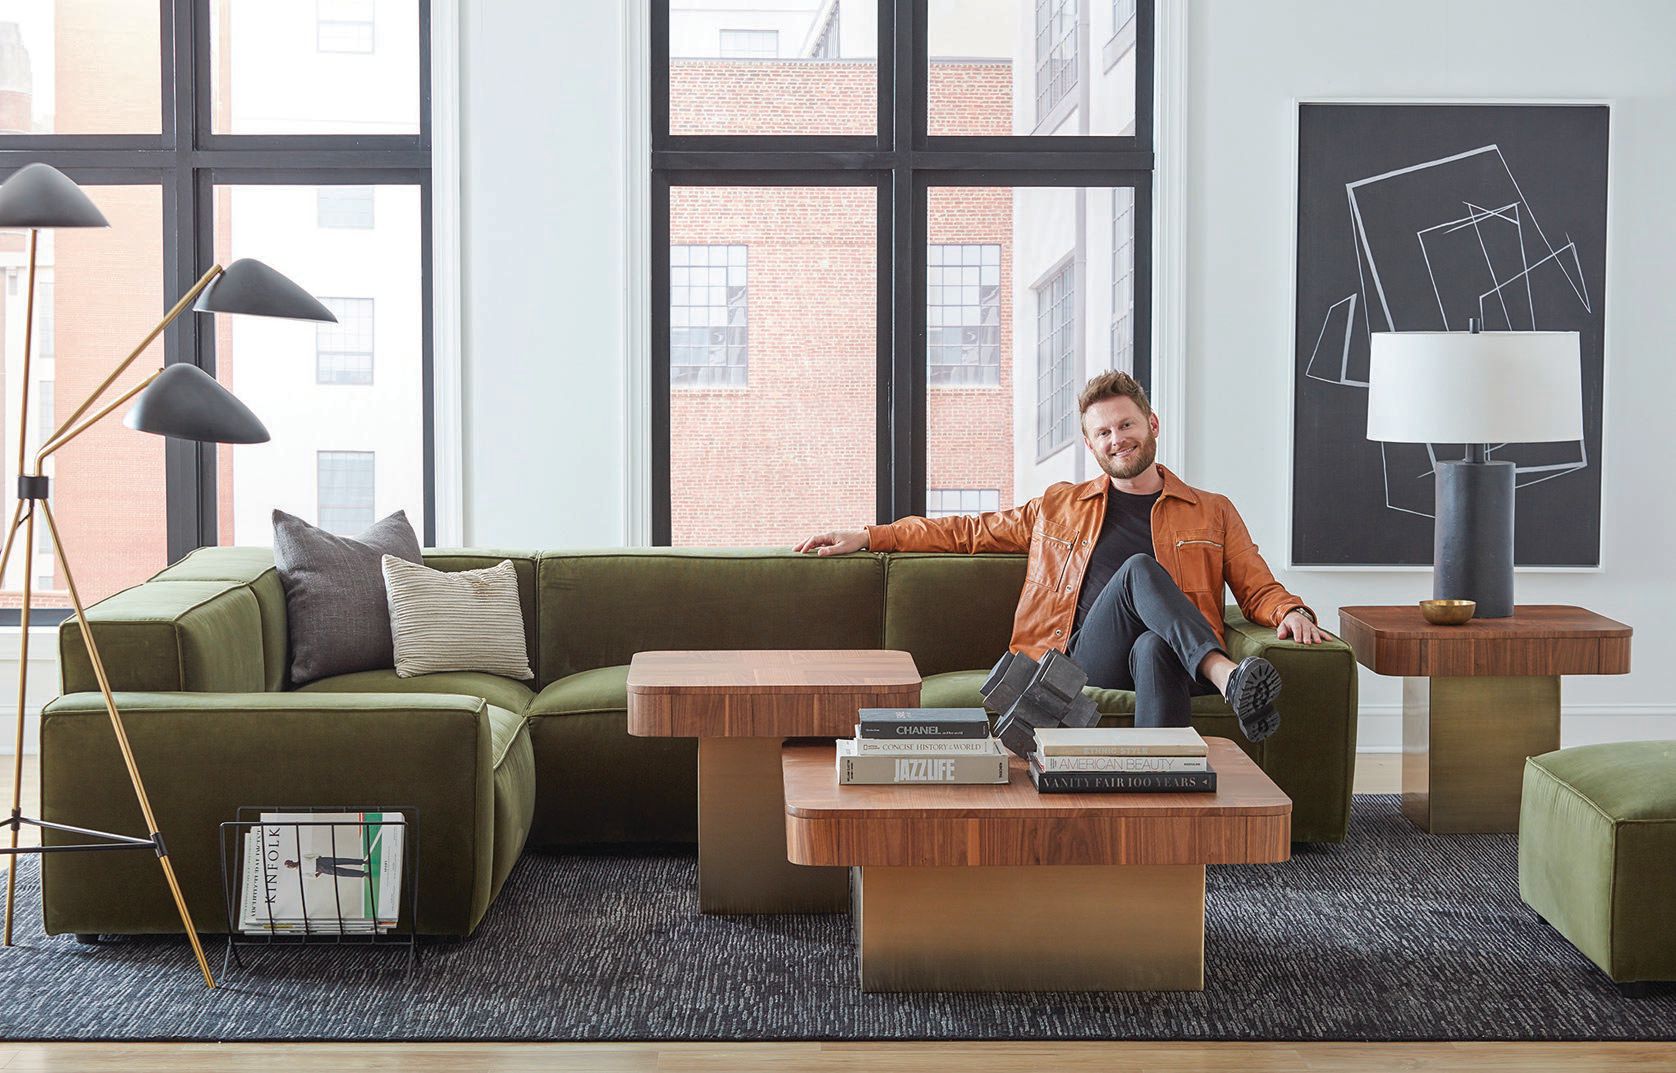 Berk sources chic finds and shares tips and tricks through his lifestyle site, bobbyberk.com. PHOTO BY MAX MONTGOMERY/COURTESY OF BOBBY BERK